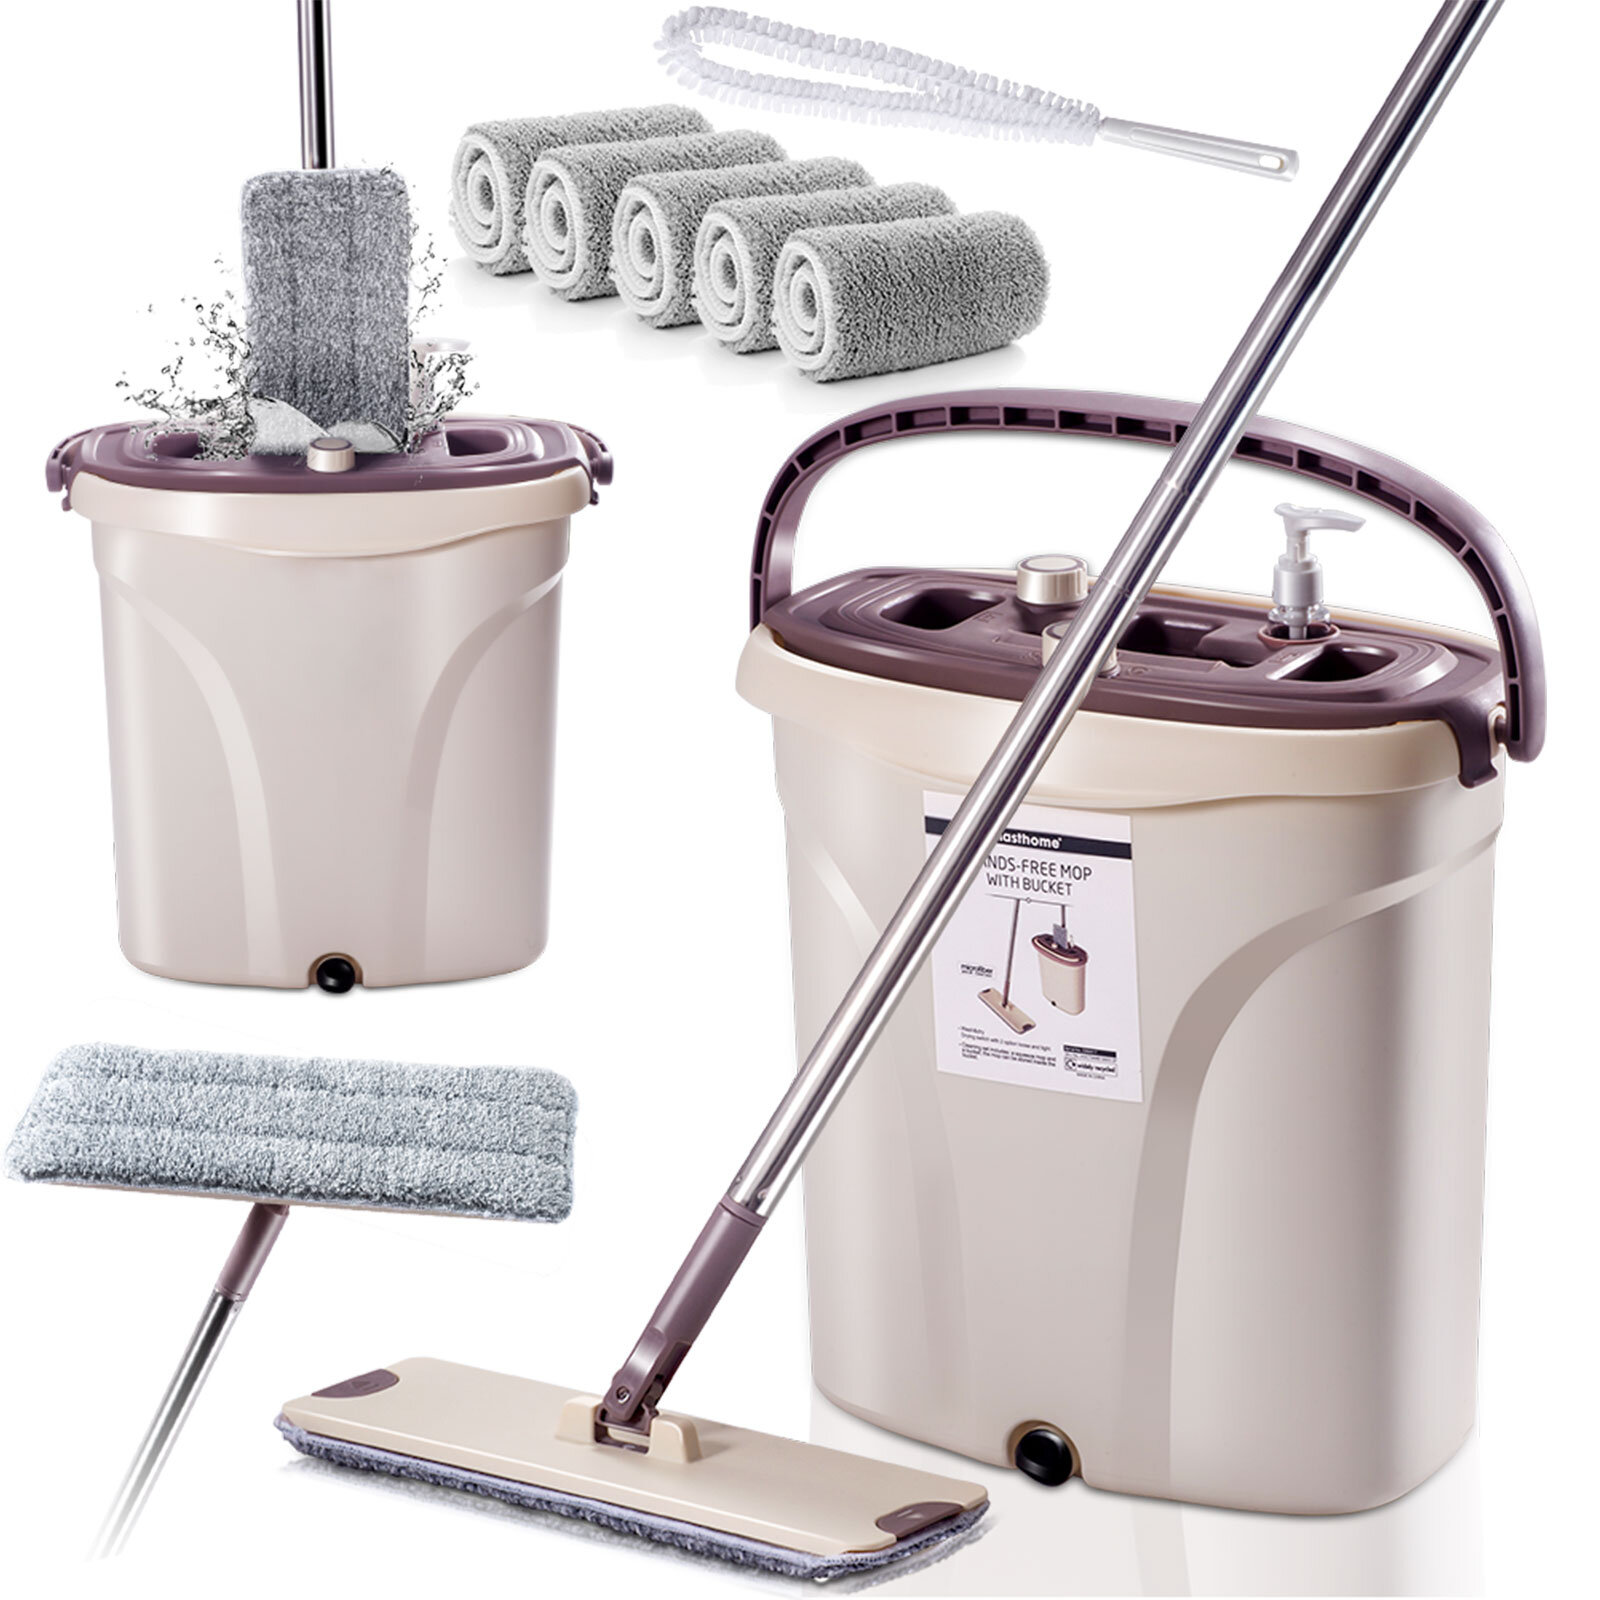 POIUYTR mop Rotary Mop Flat Squeeze Mop and Bucket Hand Easily Wring The Floor Clean Mop Microfiber Mop Pad Dry and Wet Use  DR-BHW4 